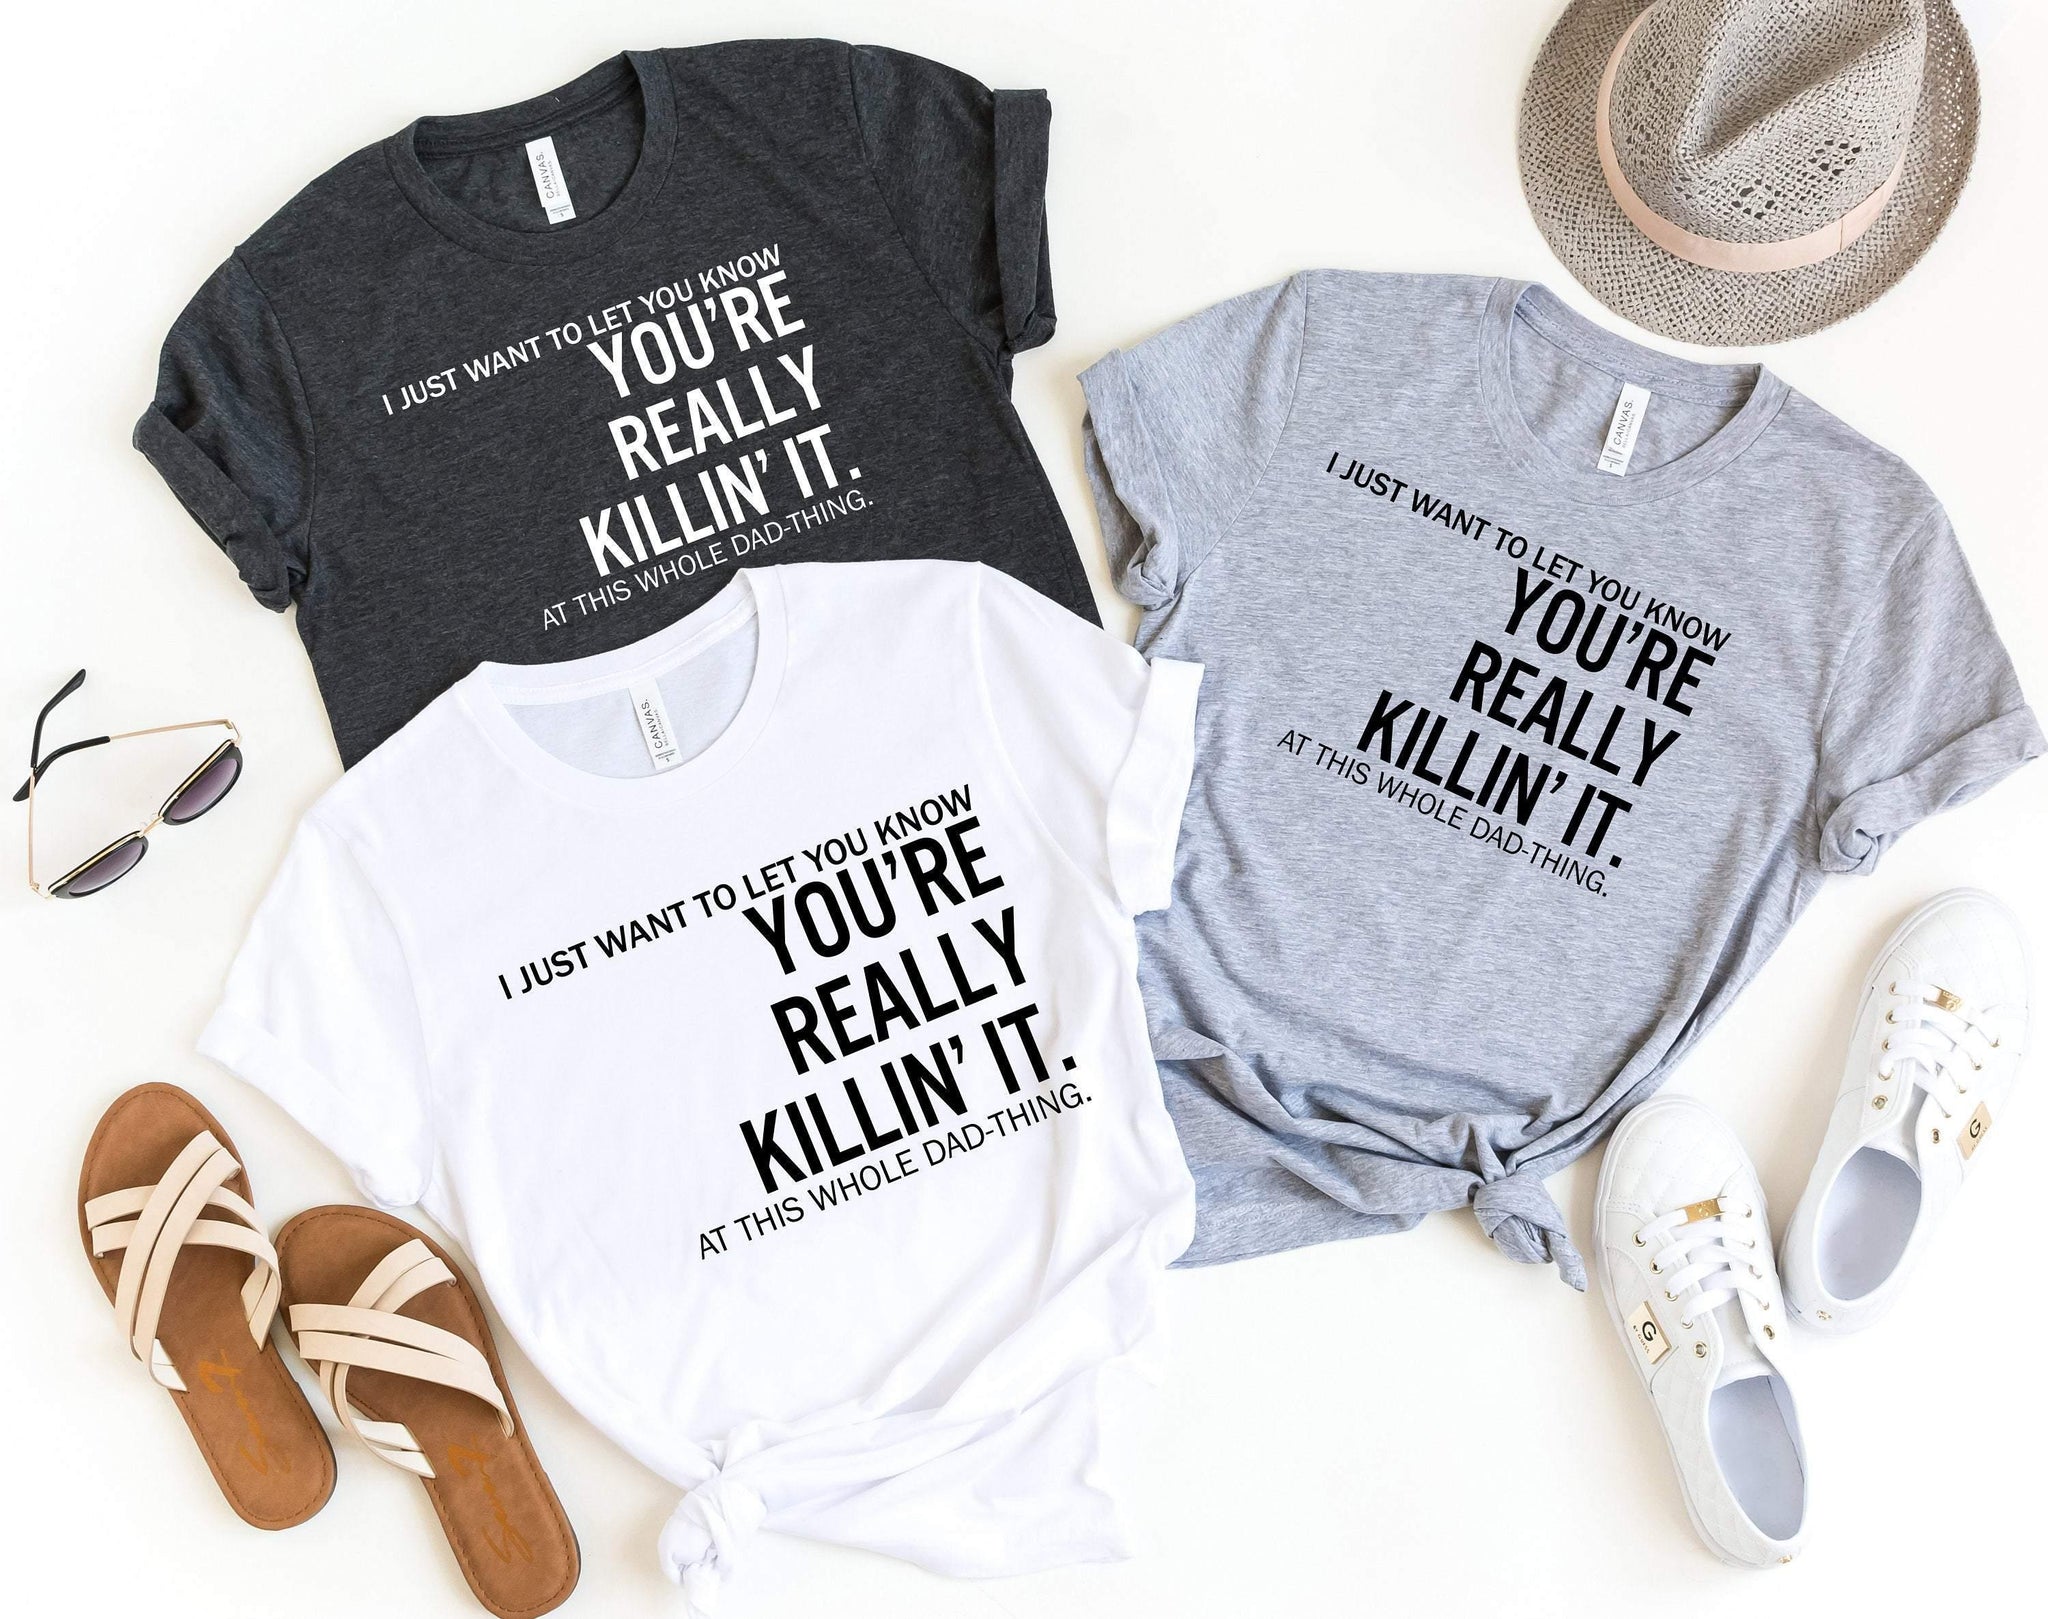 Dad You are Really Killin' It, Funny Dad shirts, for Fathers Day, Dad gifts , Dad shirts from daughter, Funny Shirts for dad, Dad Birthday, - Fastdeliverytees.com